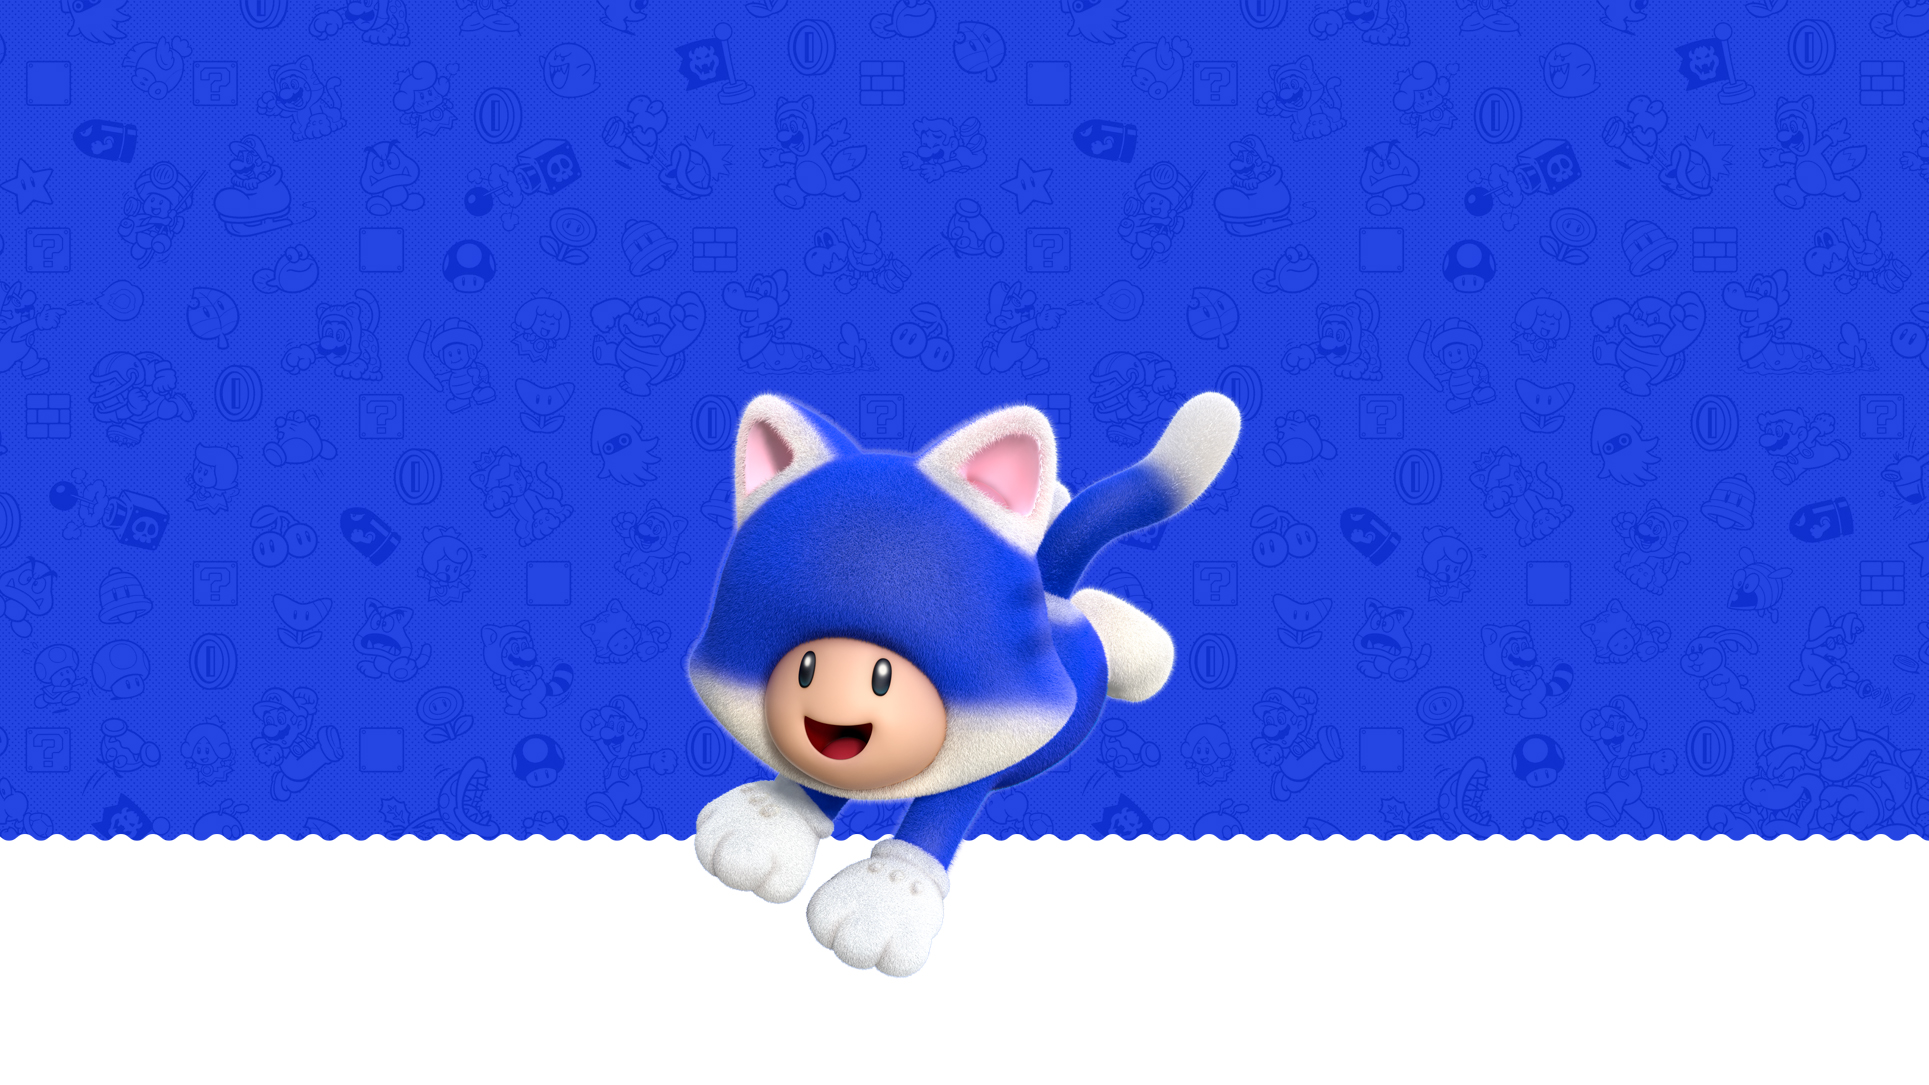 Super Mario 3d World Cat Toad Wallpaper Cat With Monocle 3129